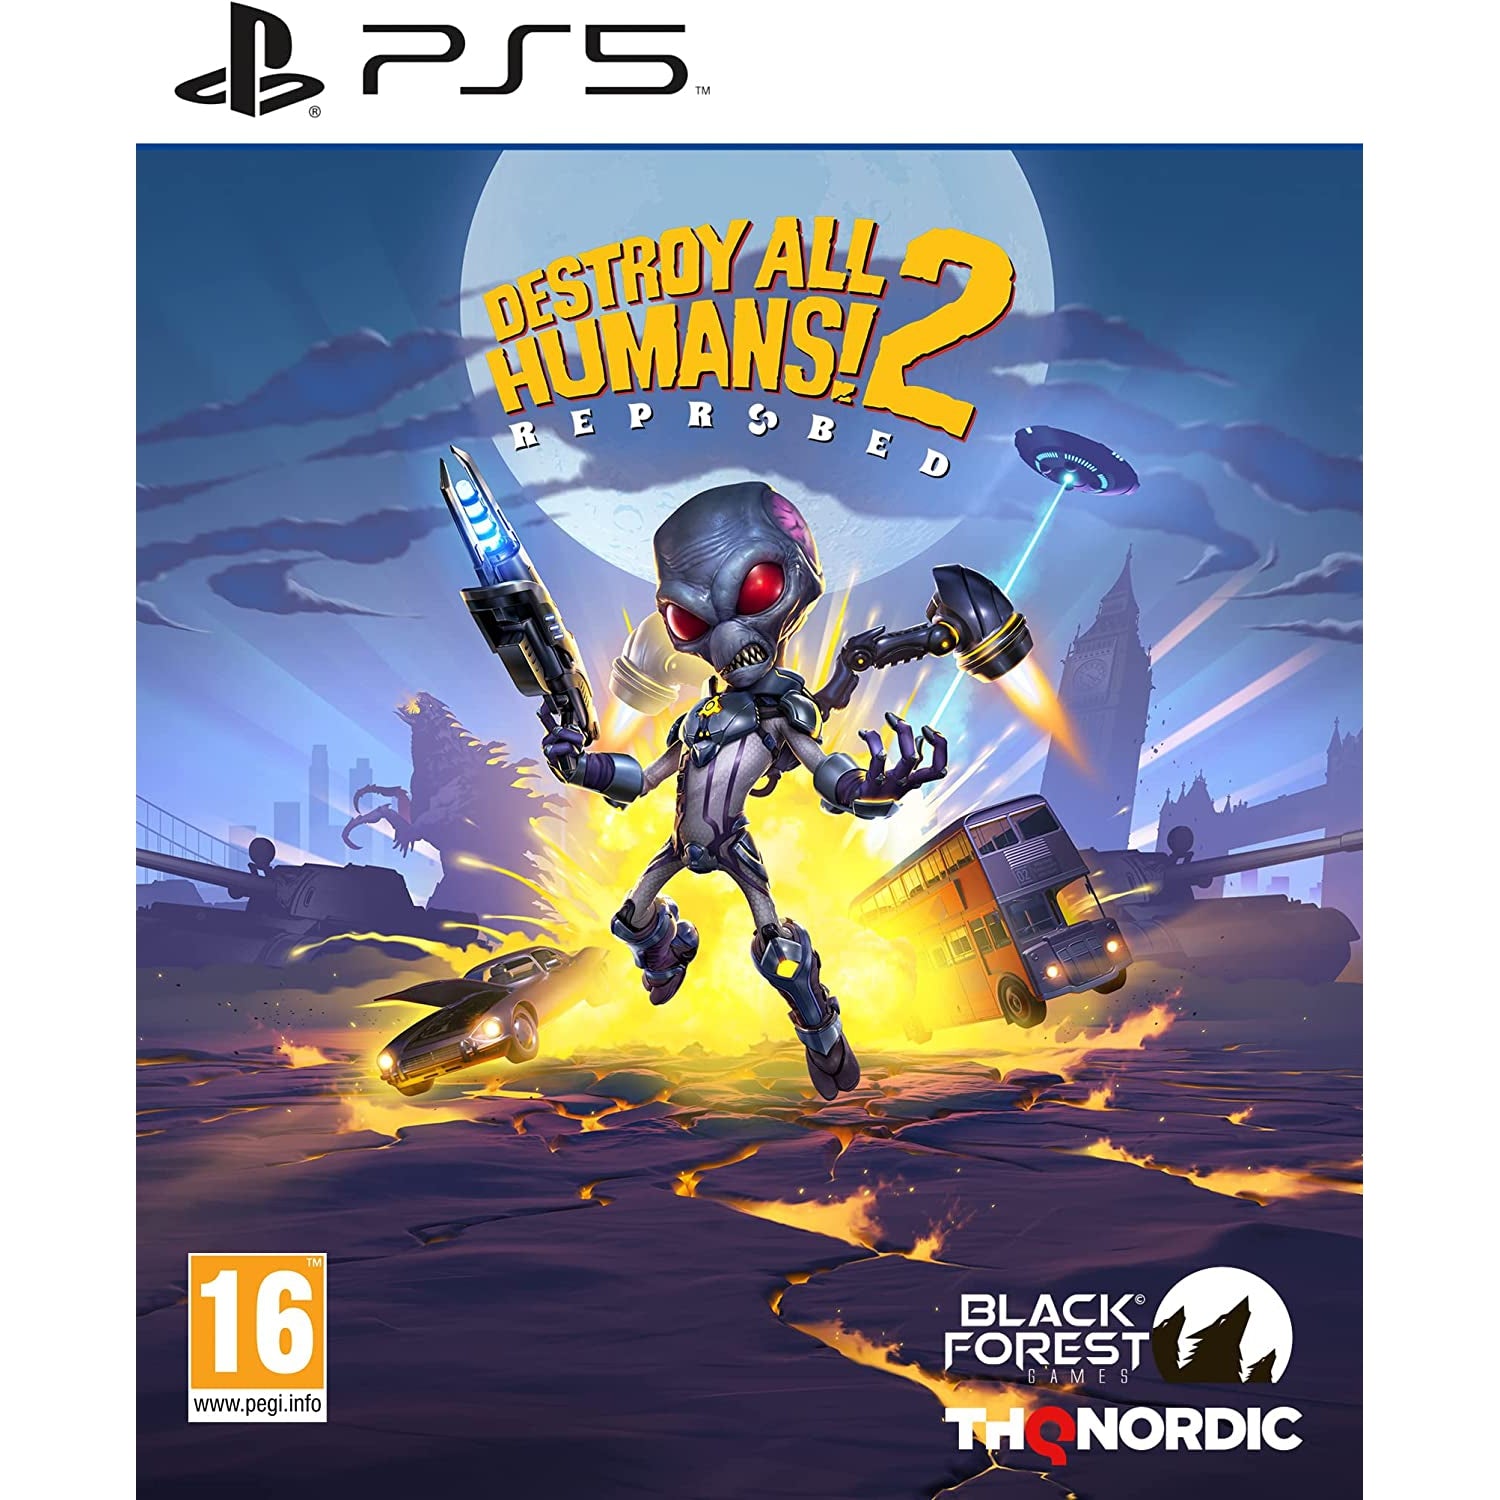 Destroy All Humans! 2 Reprobed Second Coming Edition (PS5)